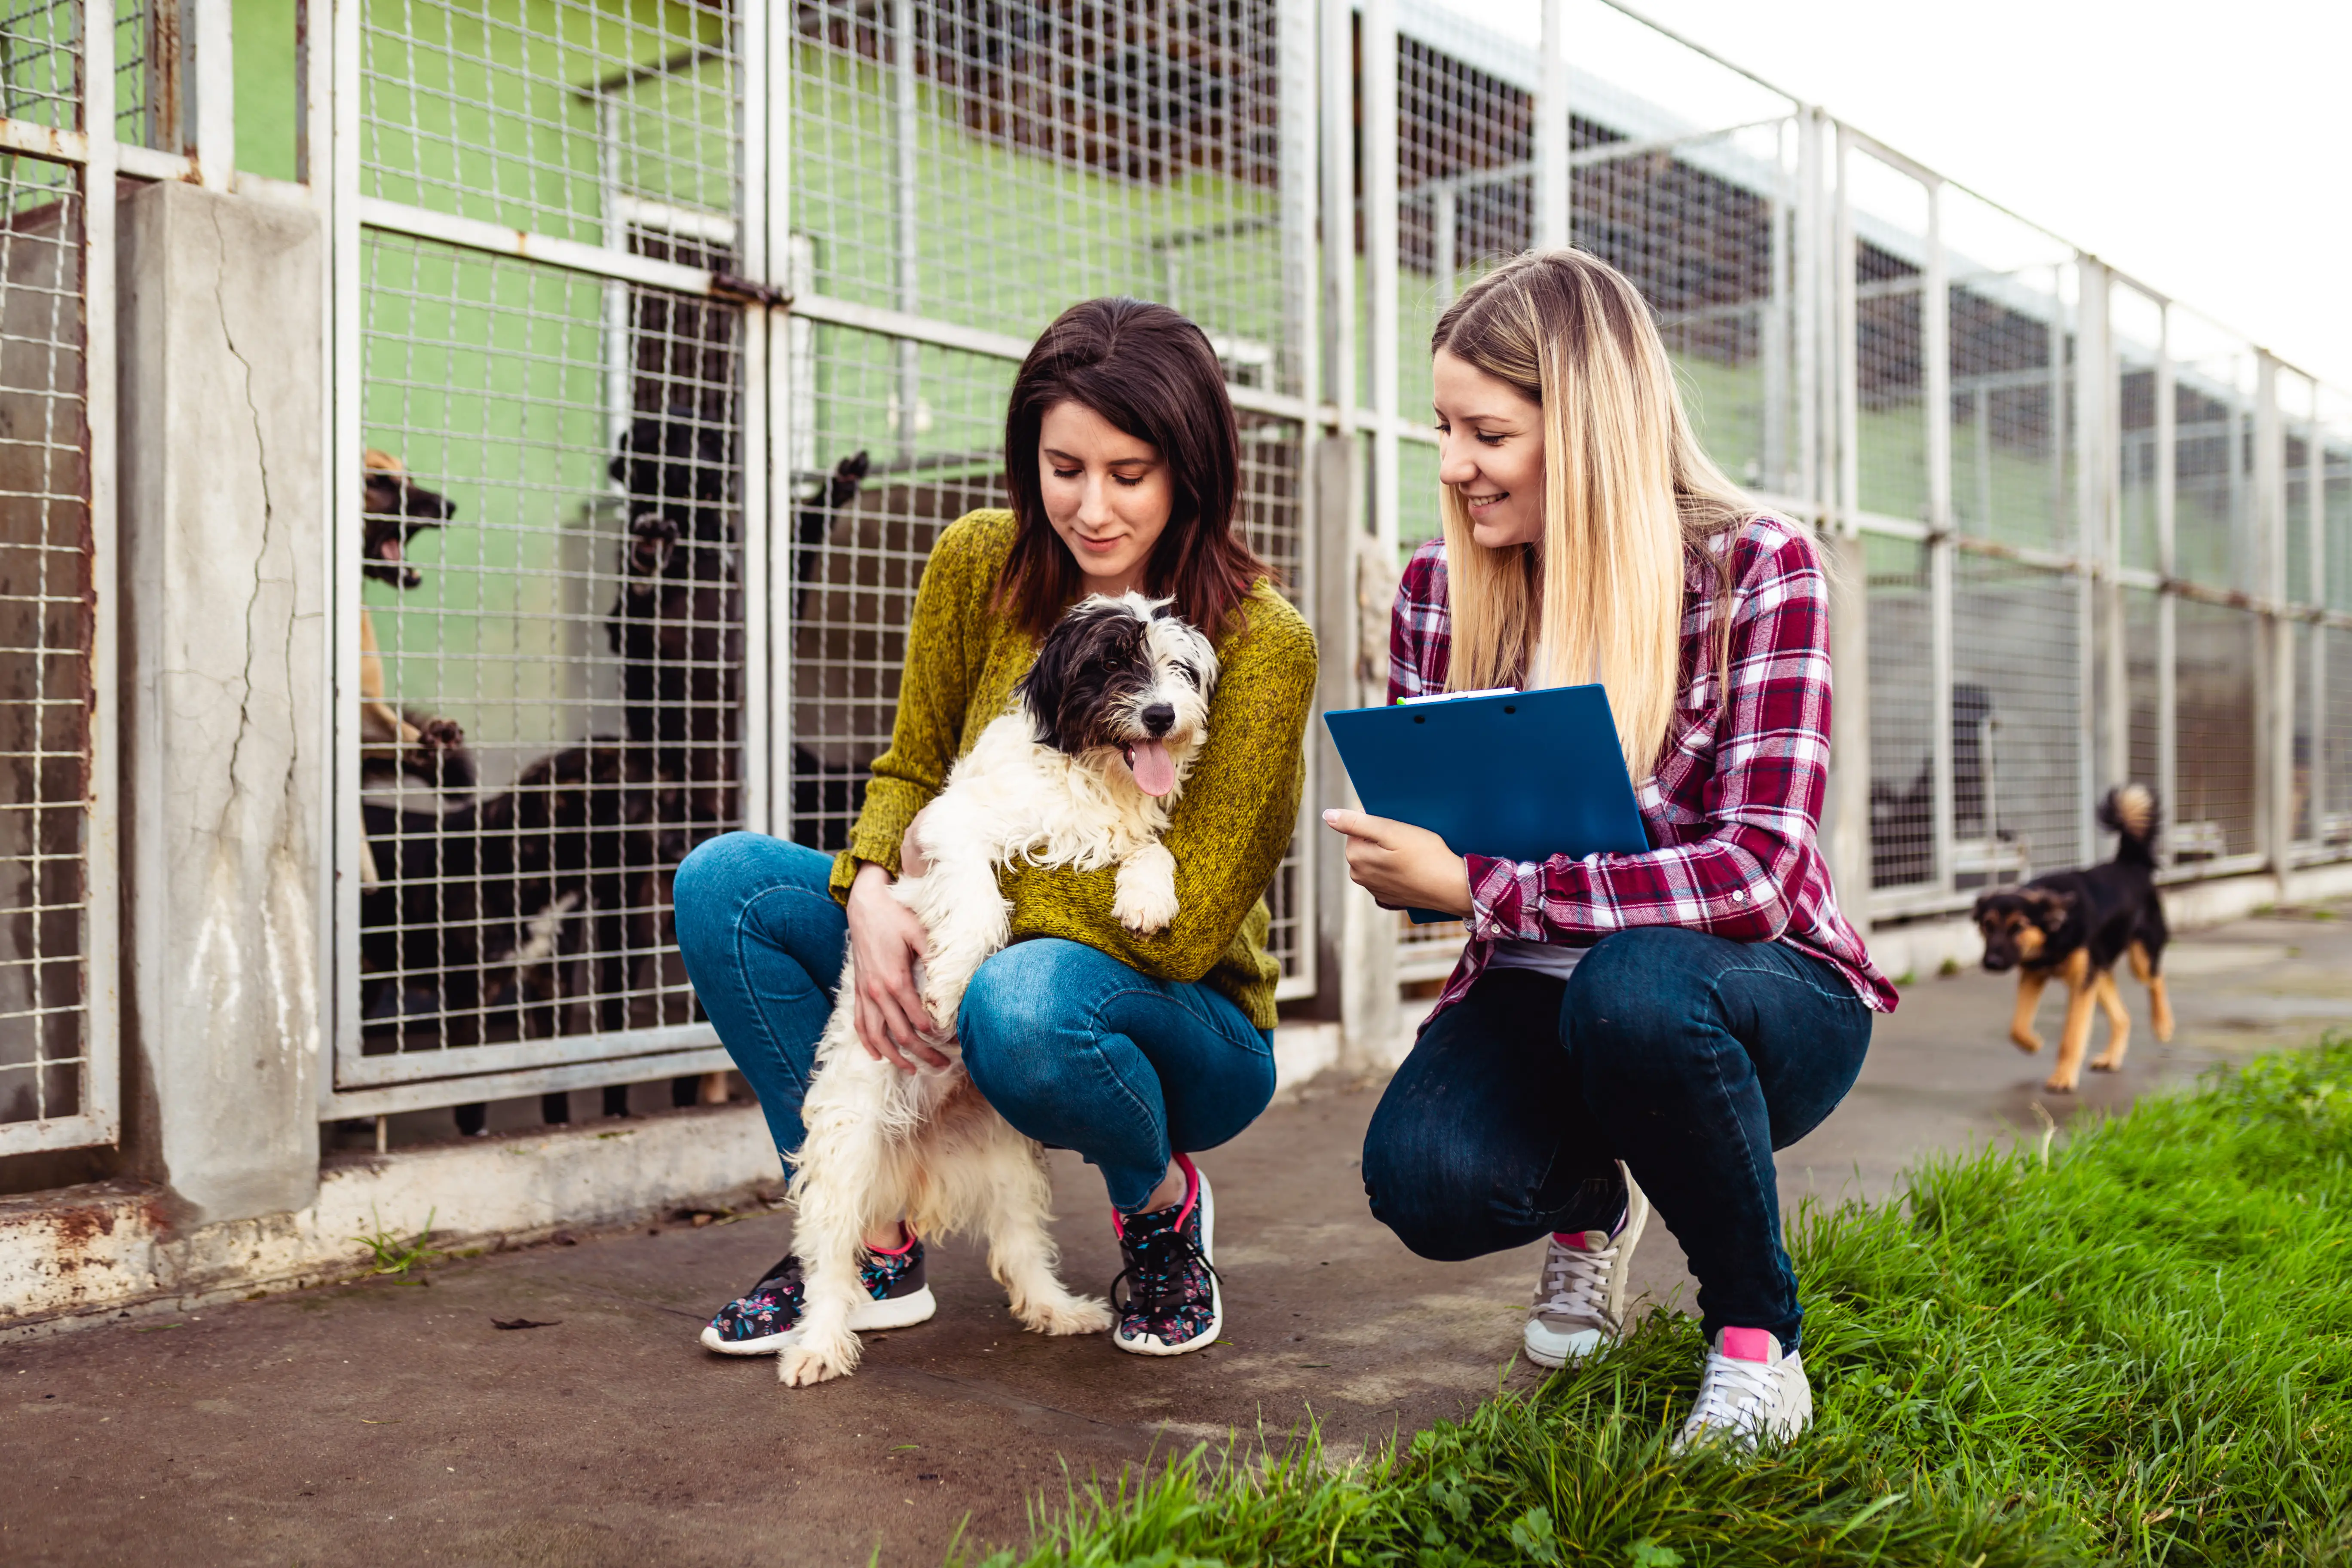 How to Support Local Dog Rescue Groups Tips and Resources